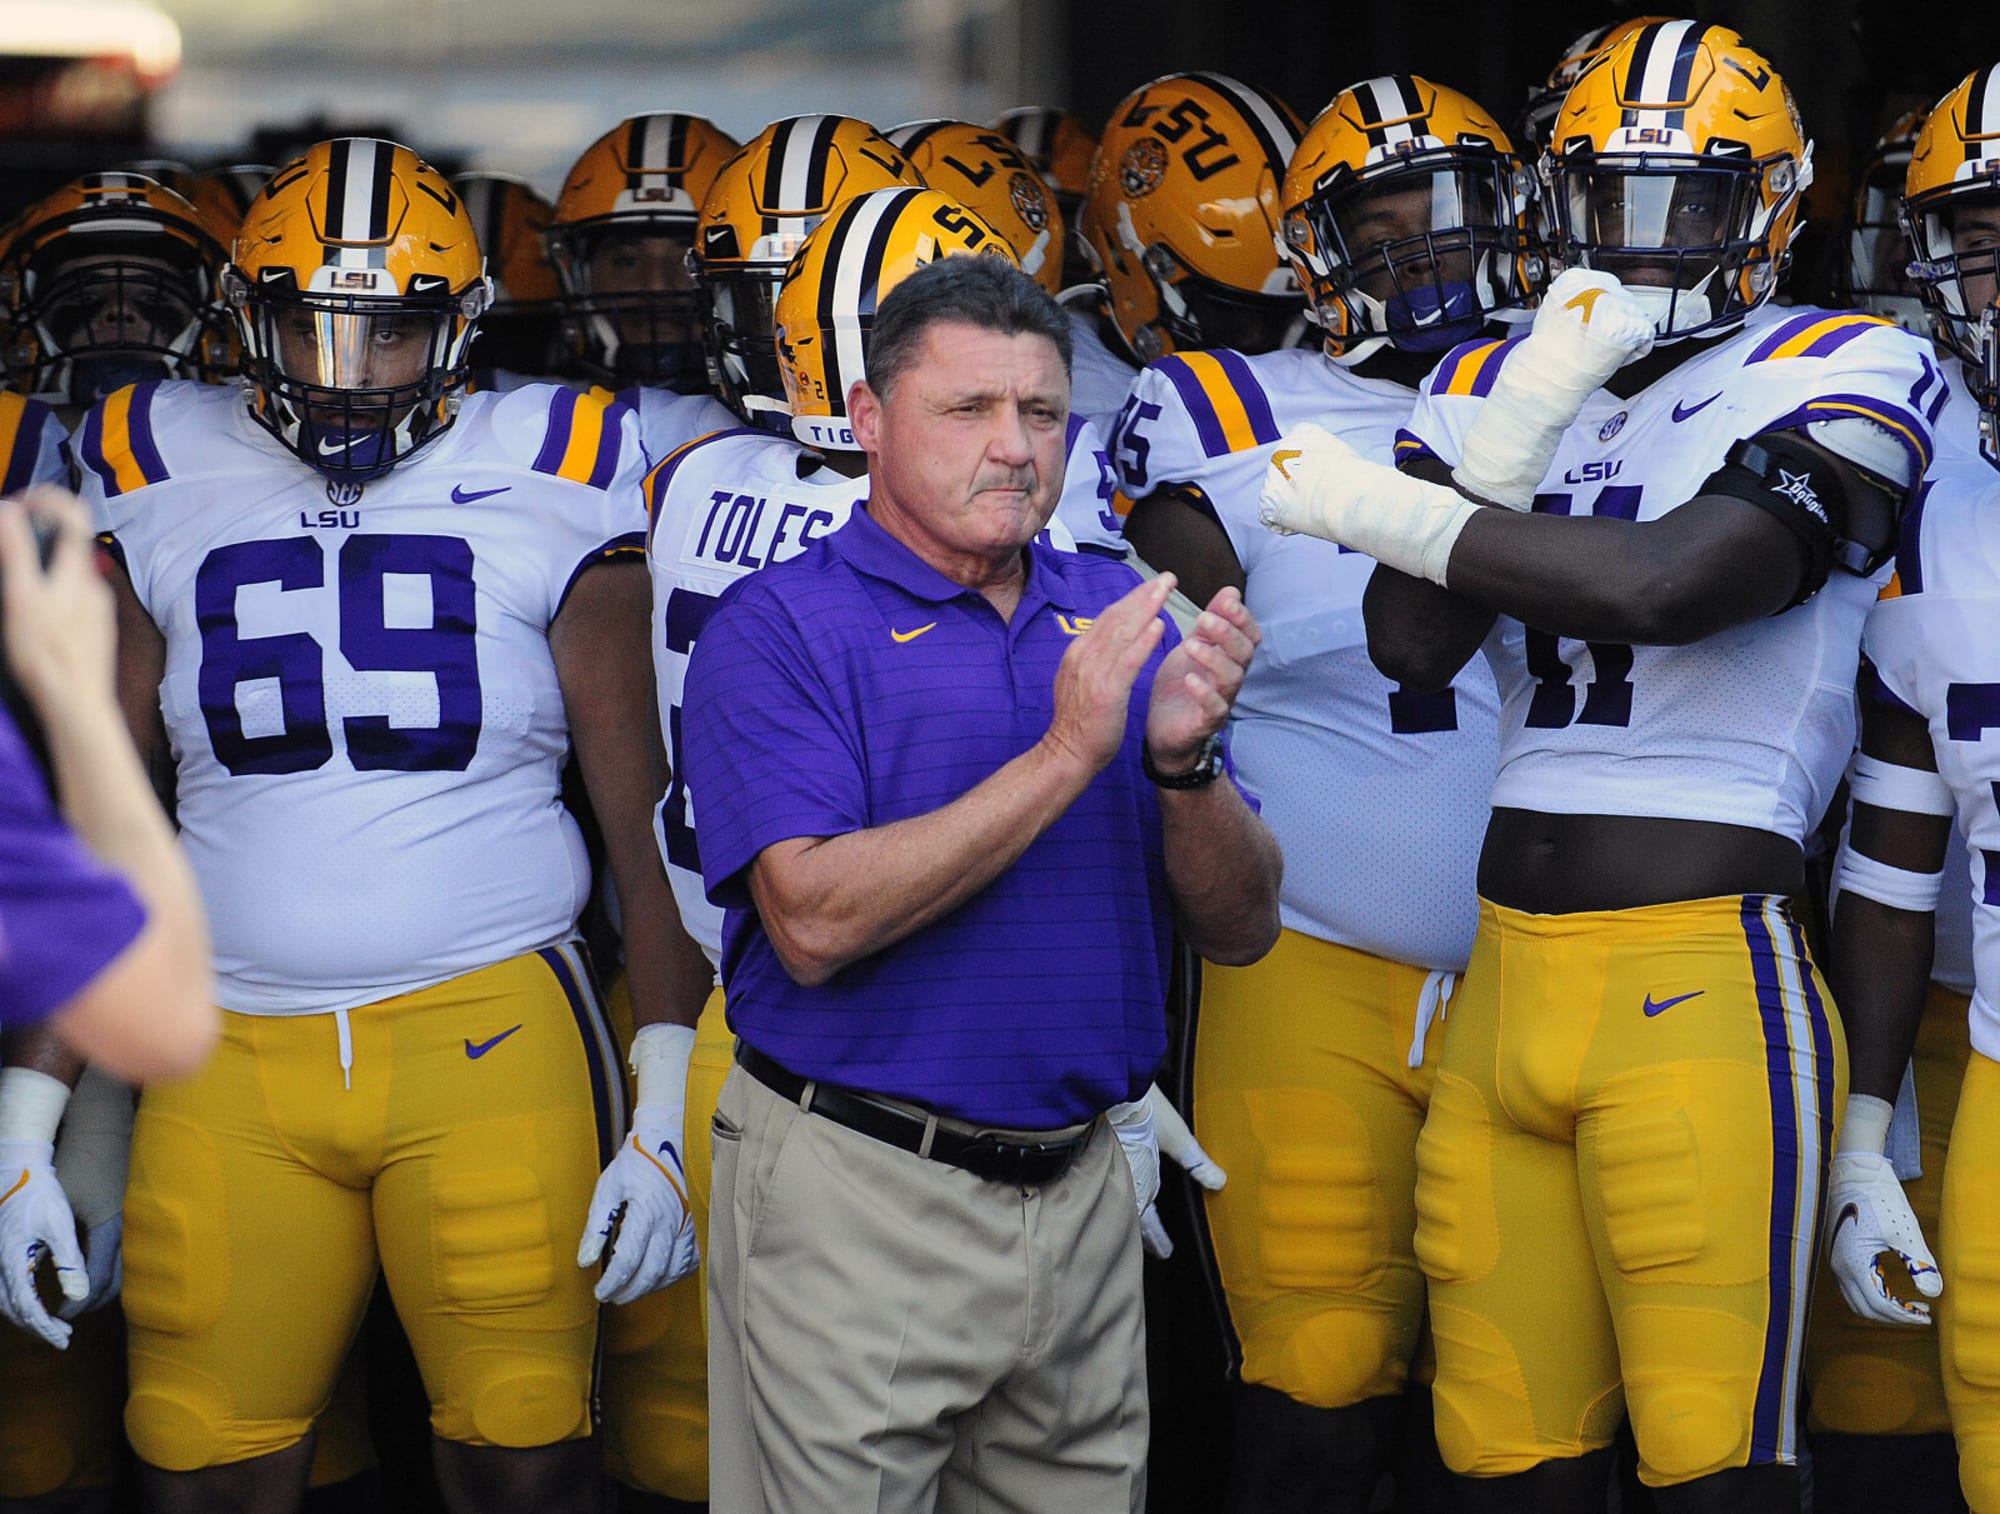 Lsu Football 2022 Schedule 2022 Lsu Football Schedule: Complete List Of Tigers Games